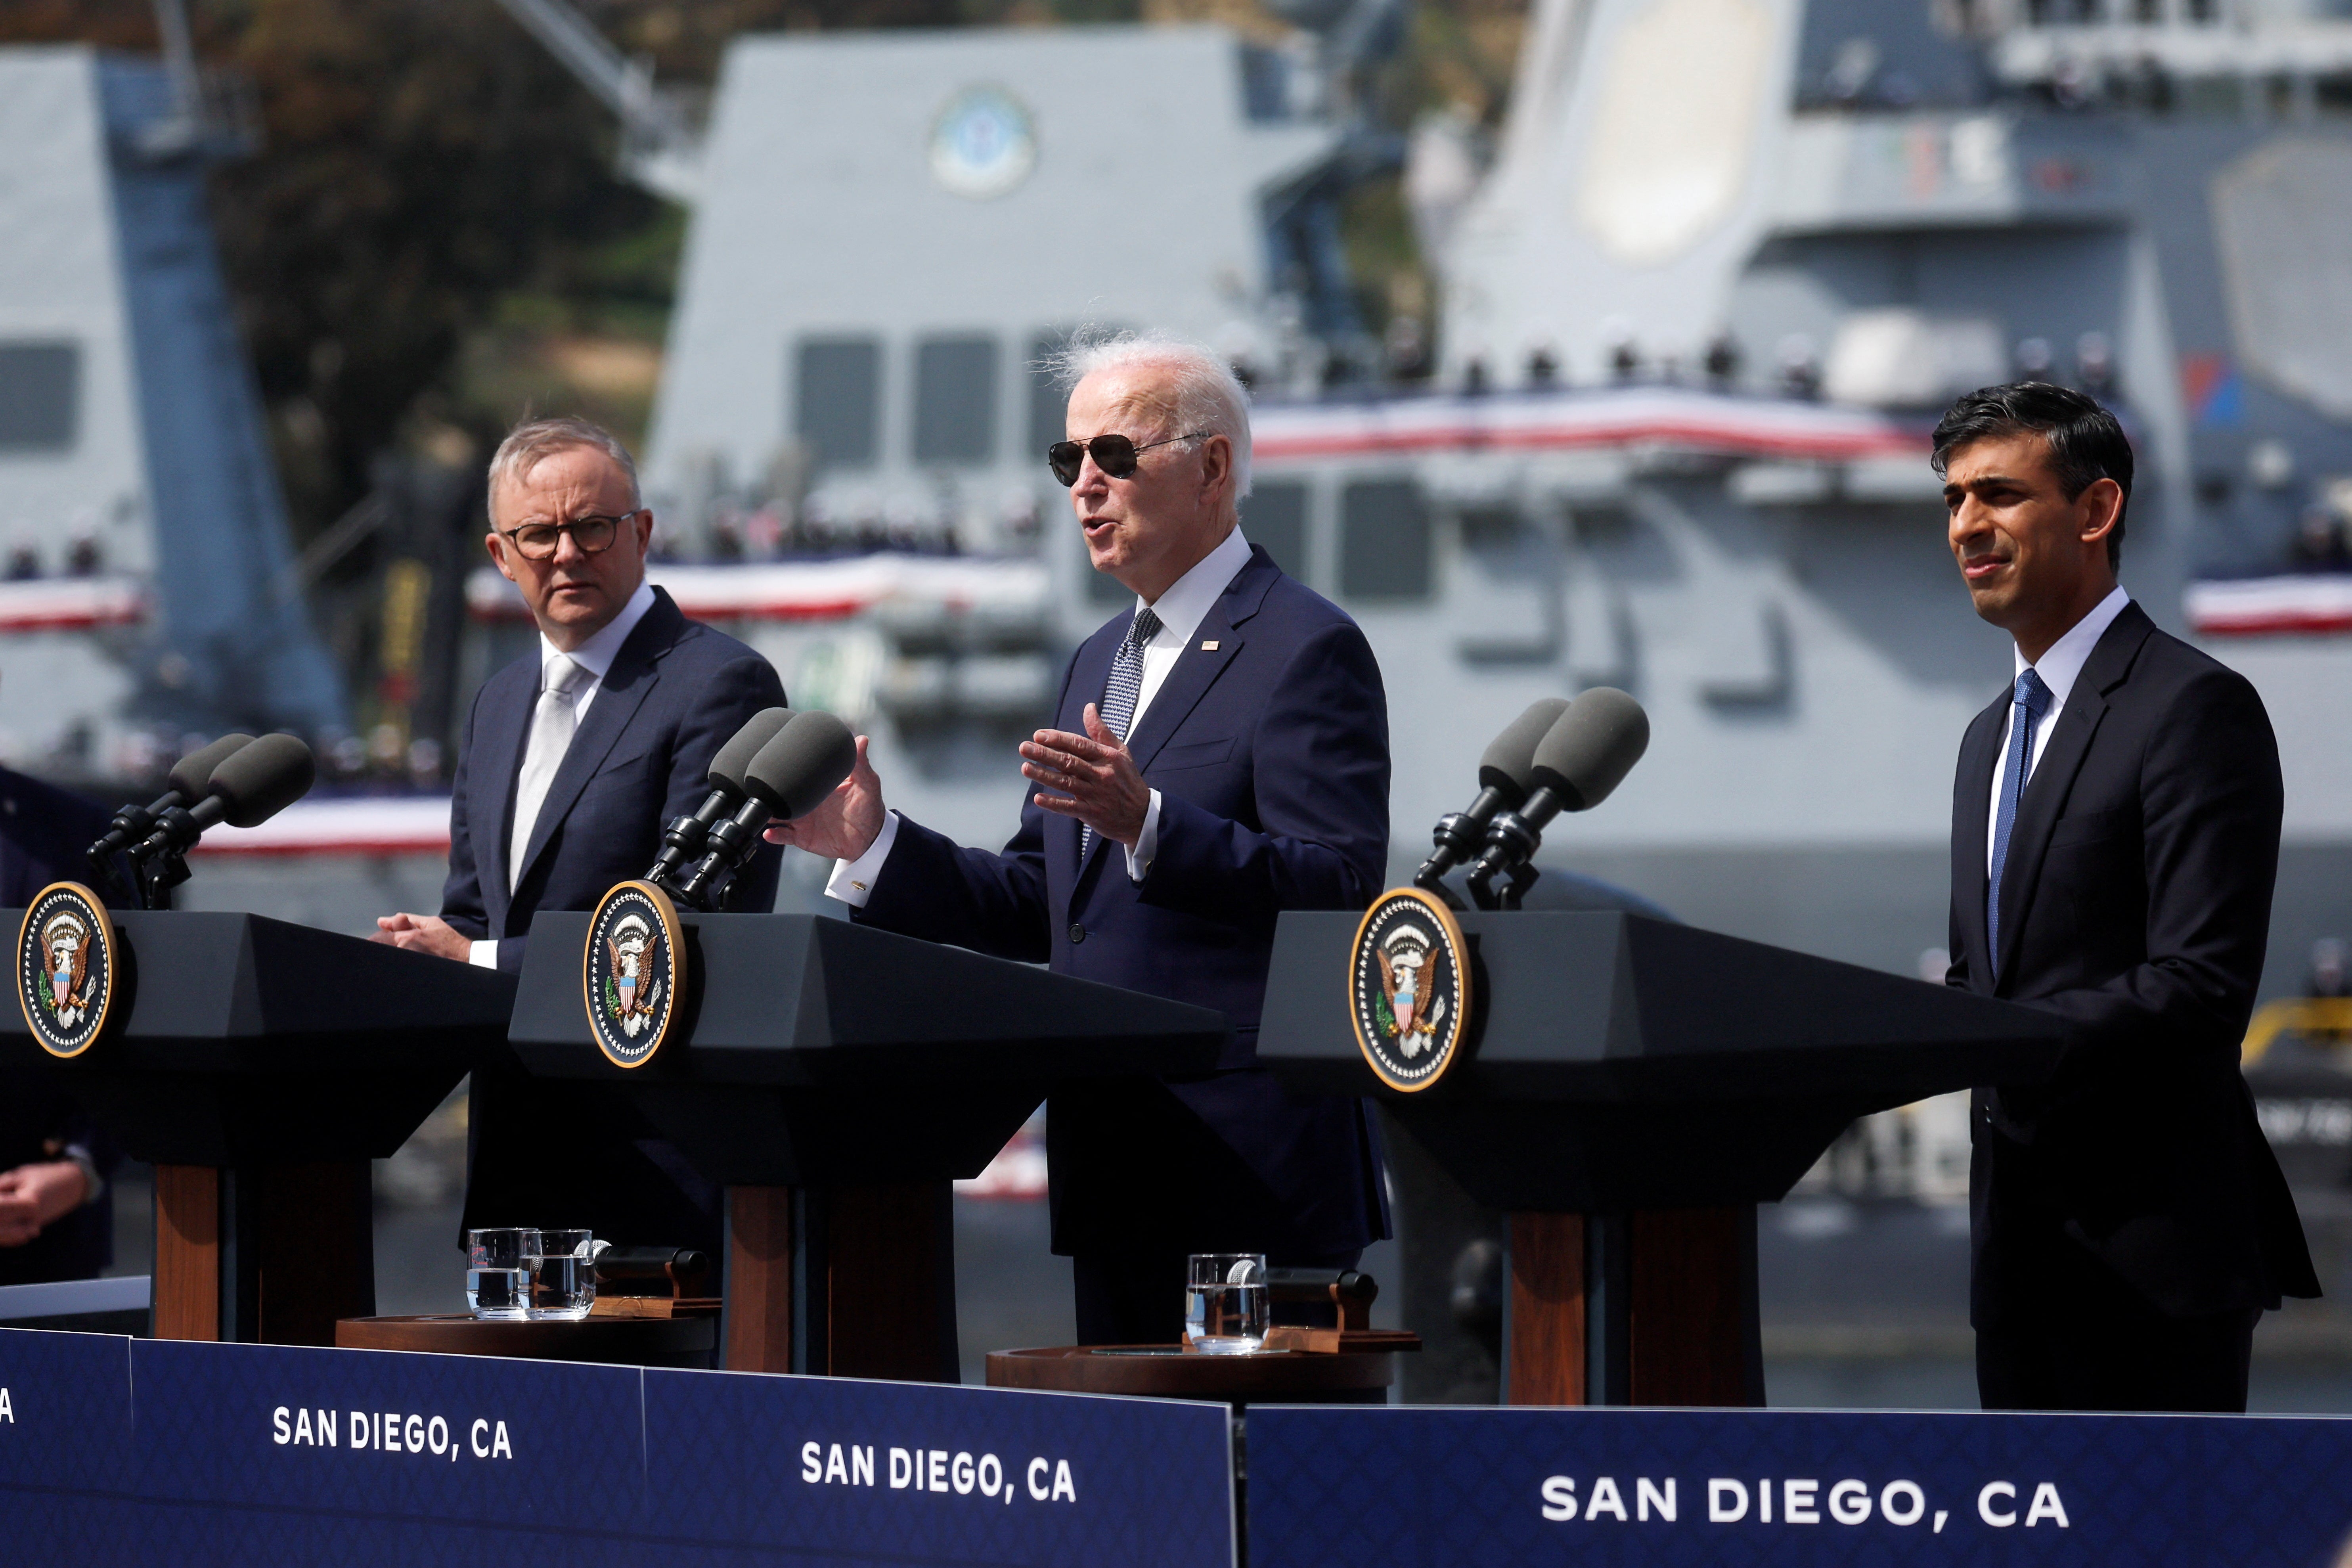 China issues ominous threat to Biden, Australia over nuclear submarine deal